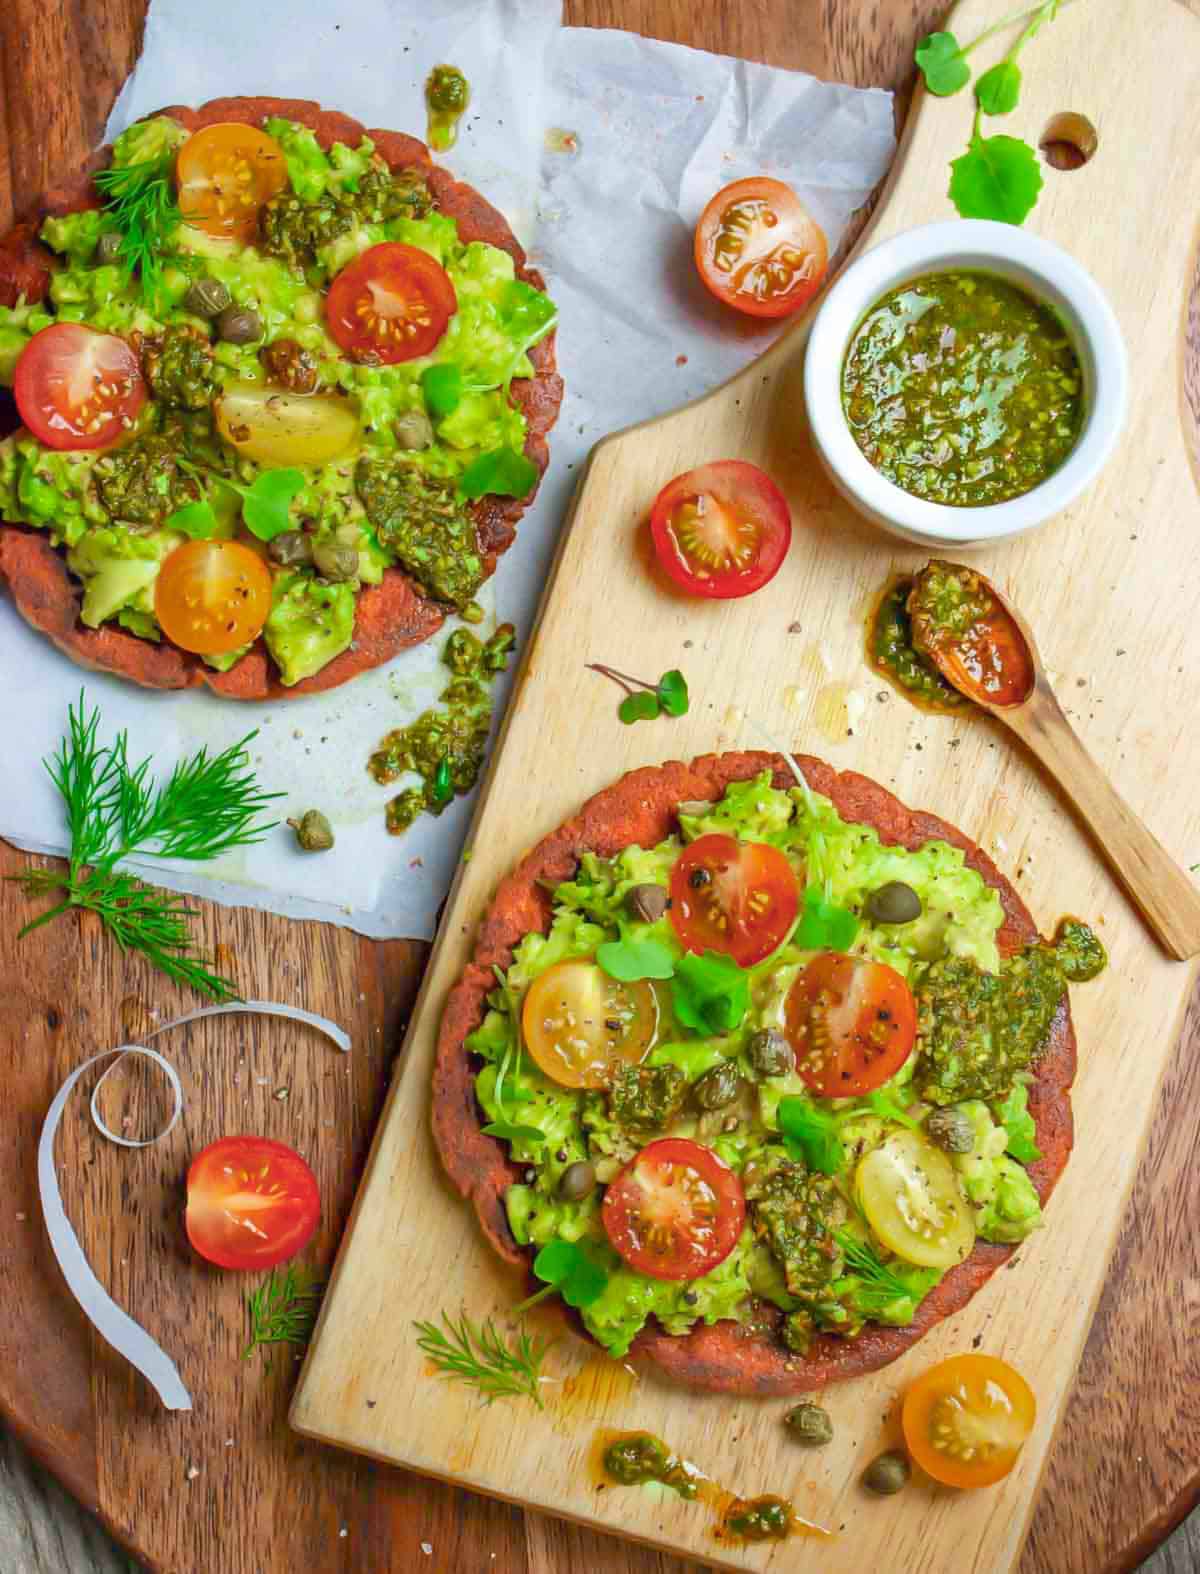 Guacamole on avocado toast with a side of pesto and topped with tomatoes.